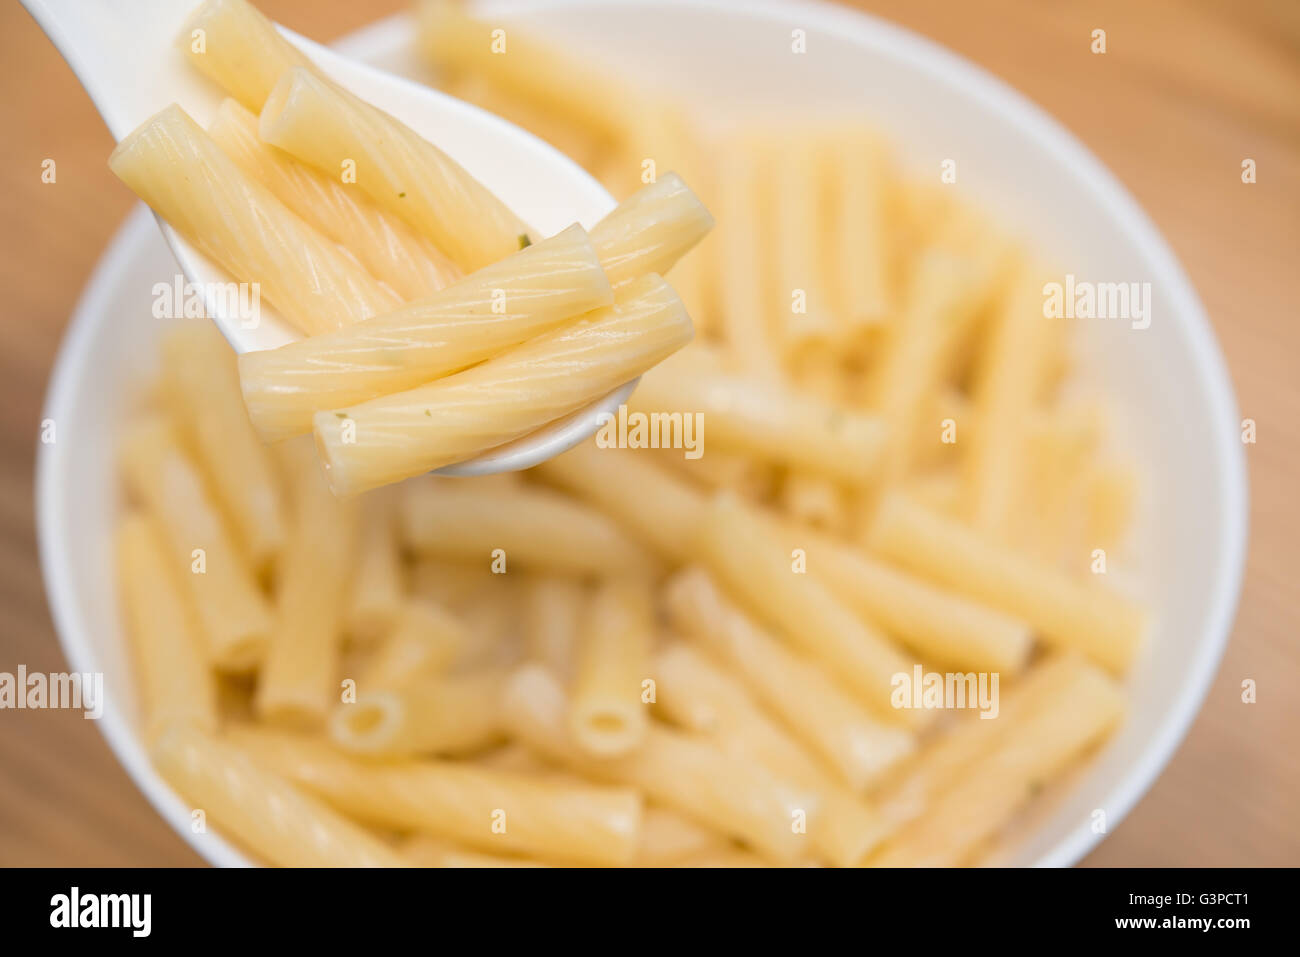 spoon taking out fresh italian pasta with cheese sauce from a bowl Stock Photo